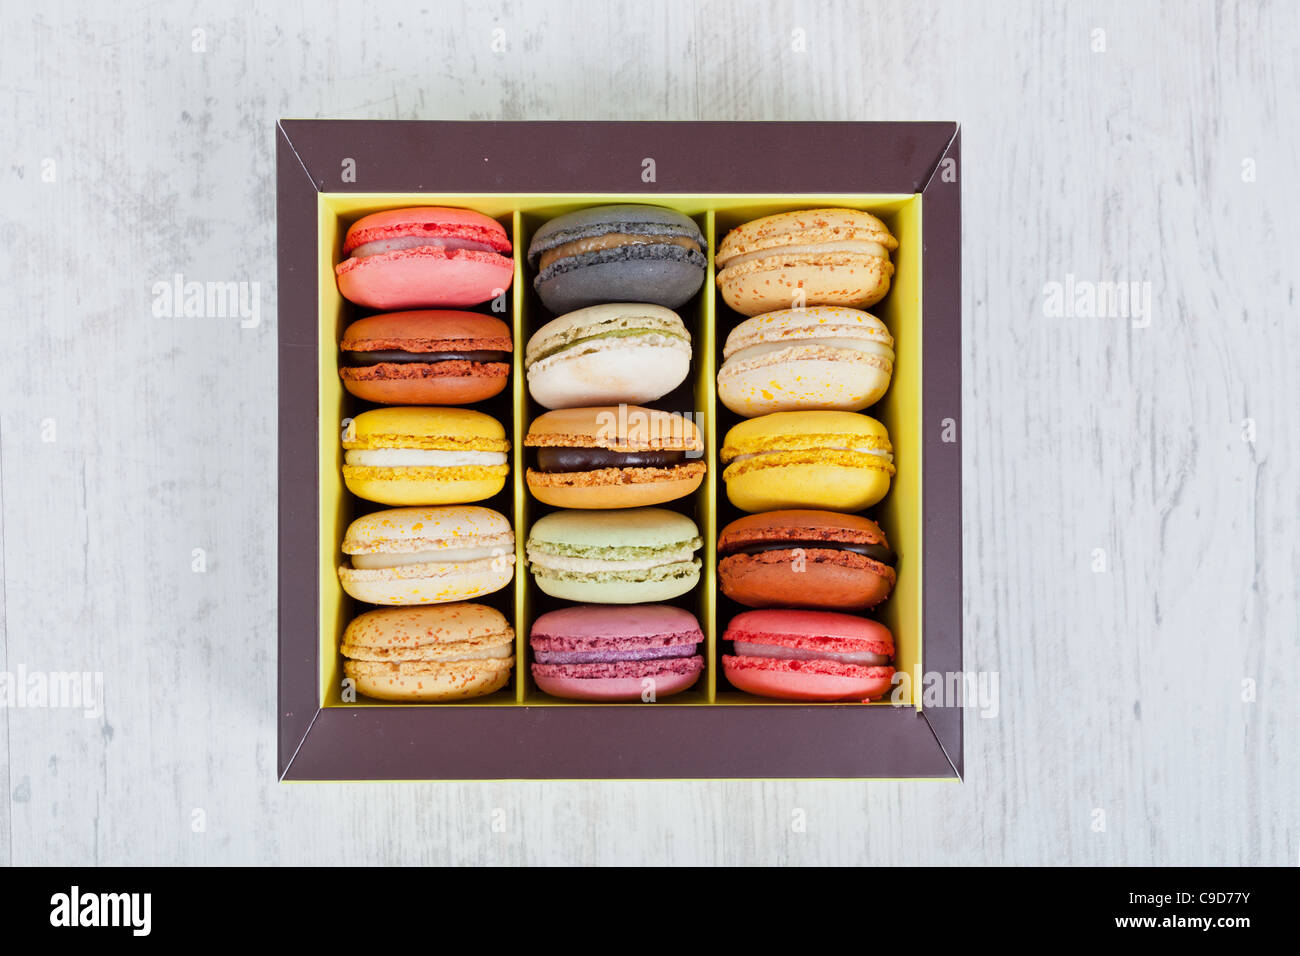 Colorful delicious macarons, typical french pastries Stock Photo